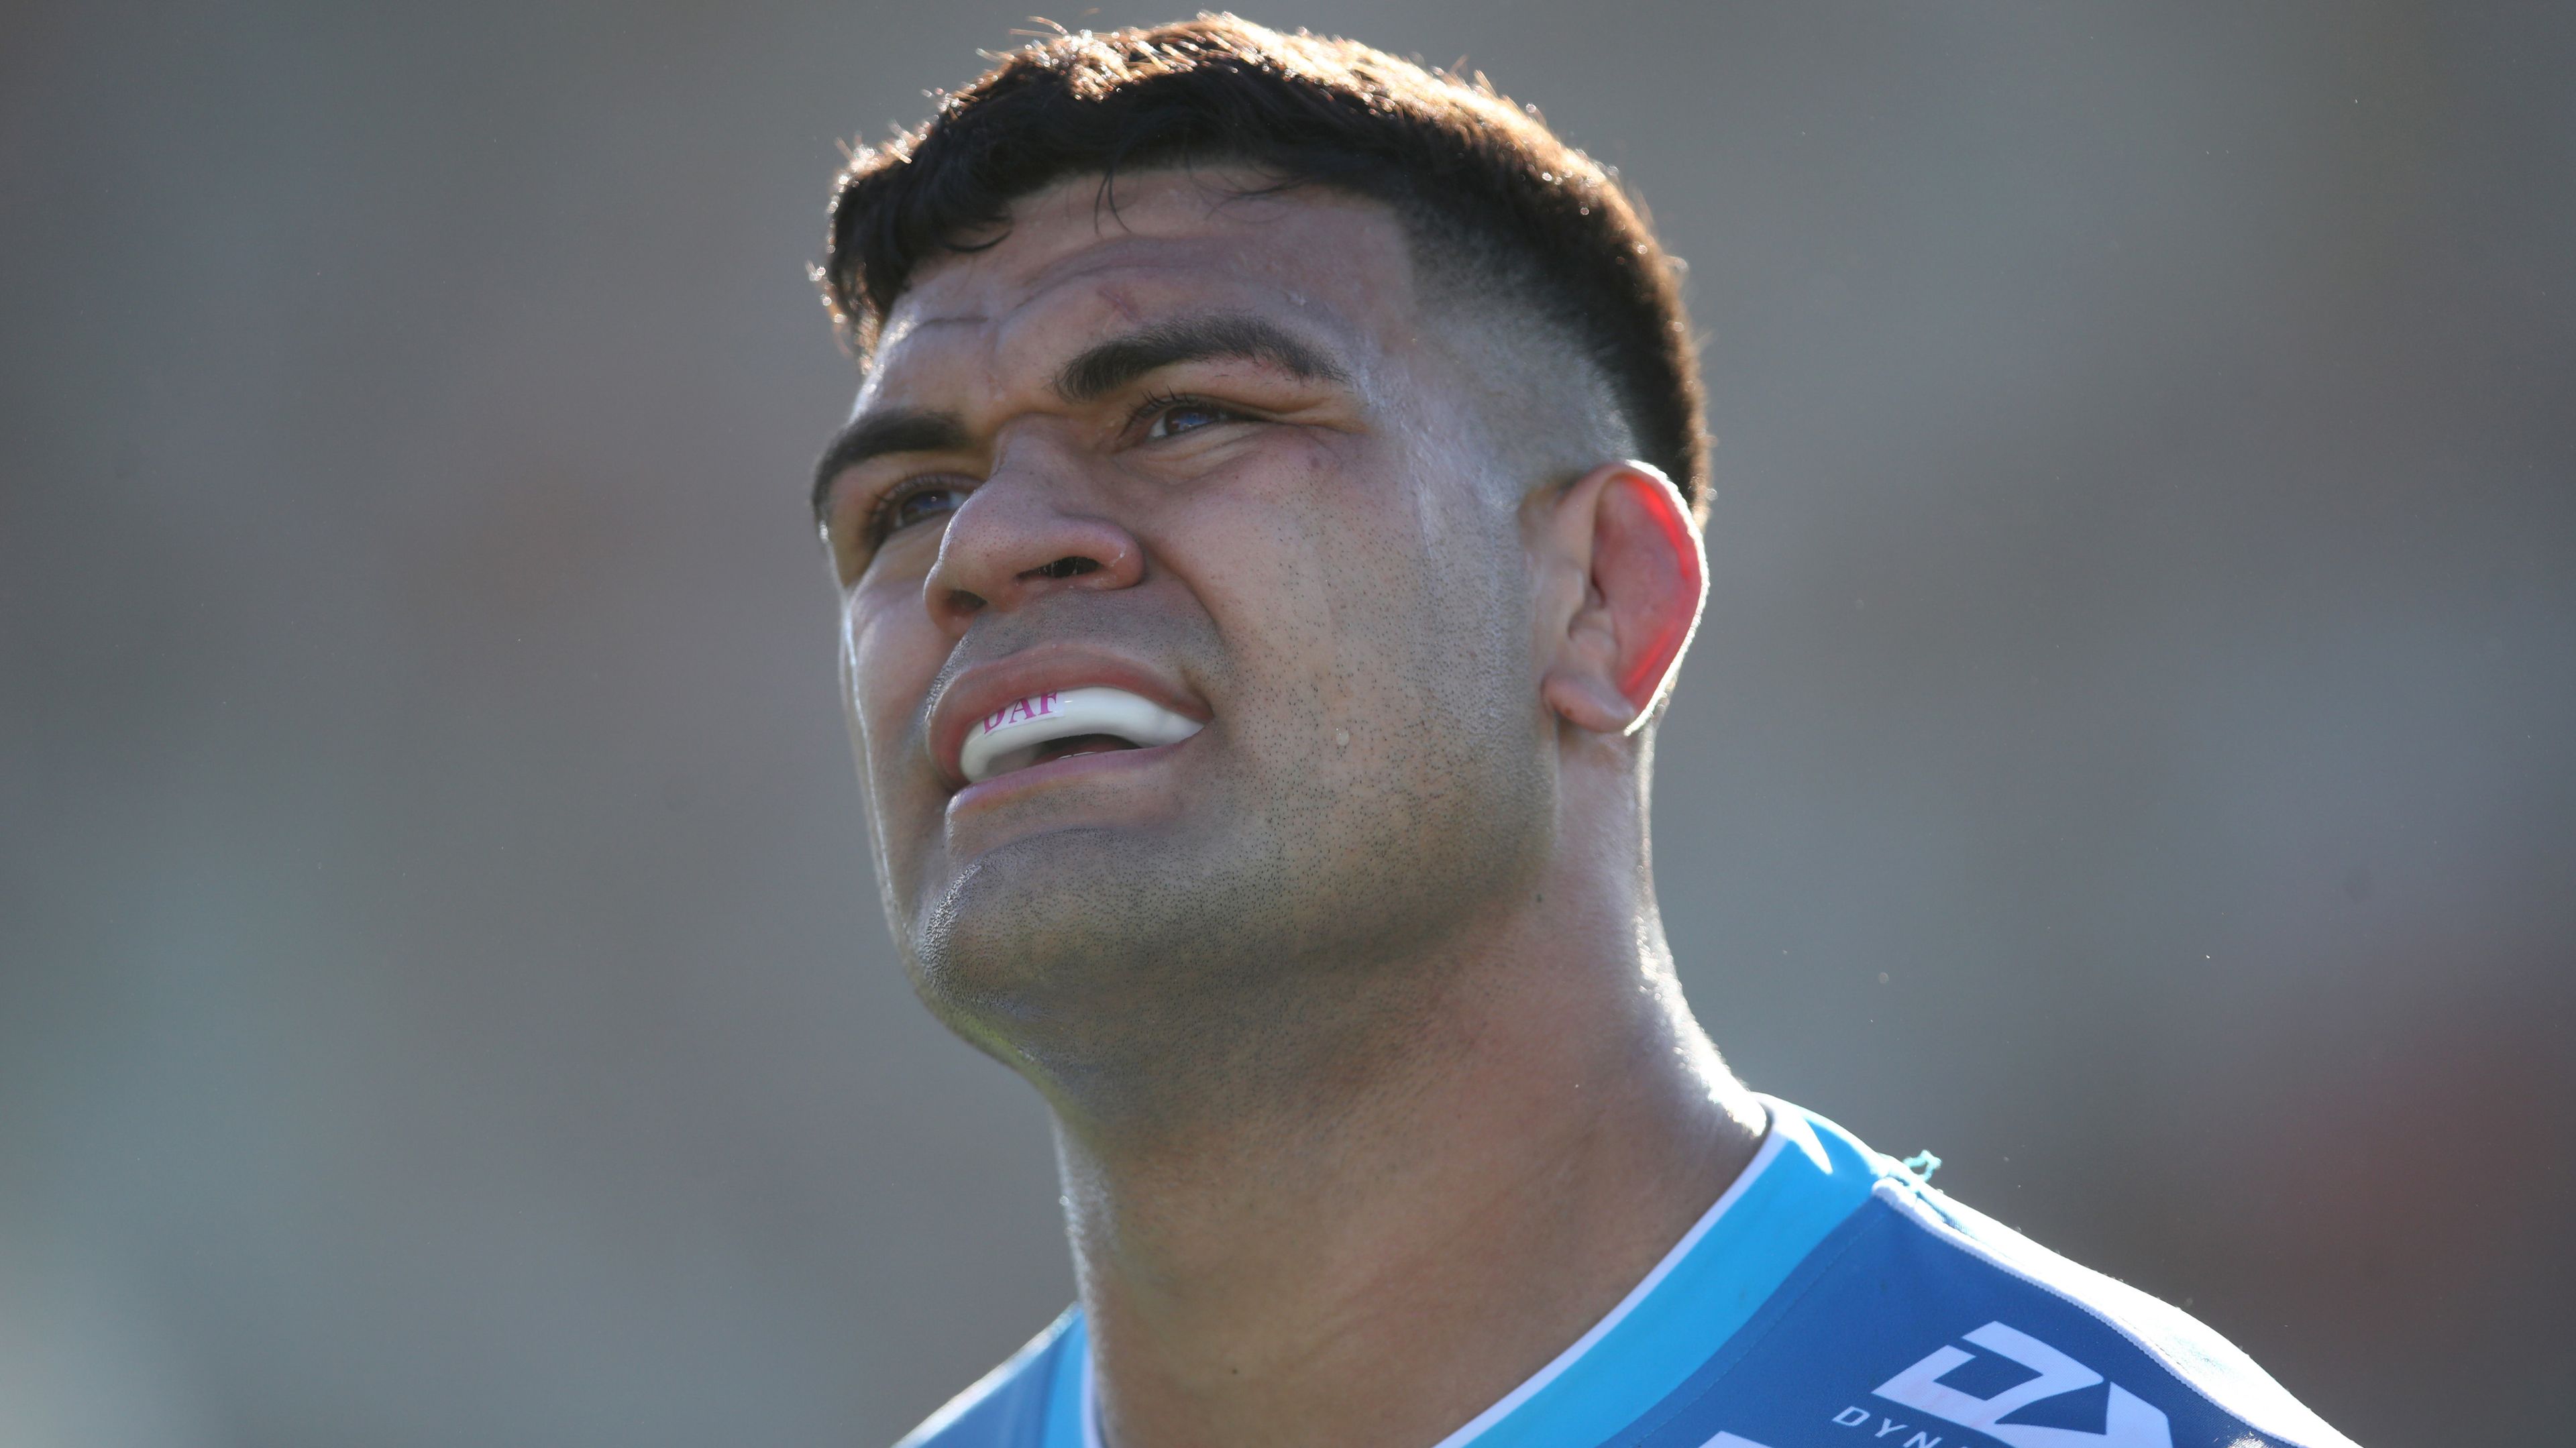 WOLLONGONG, AUSTRALIA - AUGUST 21: David Fifita of the Titans looks on during the round 23 NRL match between the St George Illawarra Dragons and the Gold Coast Titans at WIN Stadium on August 21, 2022 in Wollongong, Australia. (Photo by Jason McCawley/Getty Images)